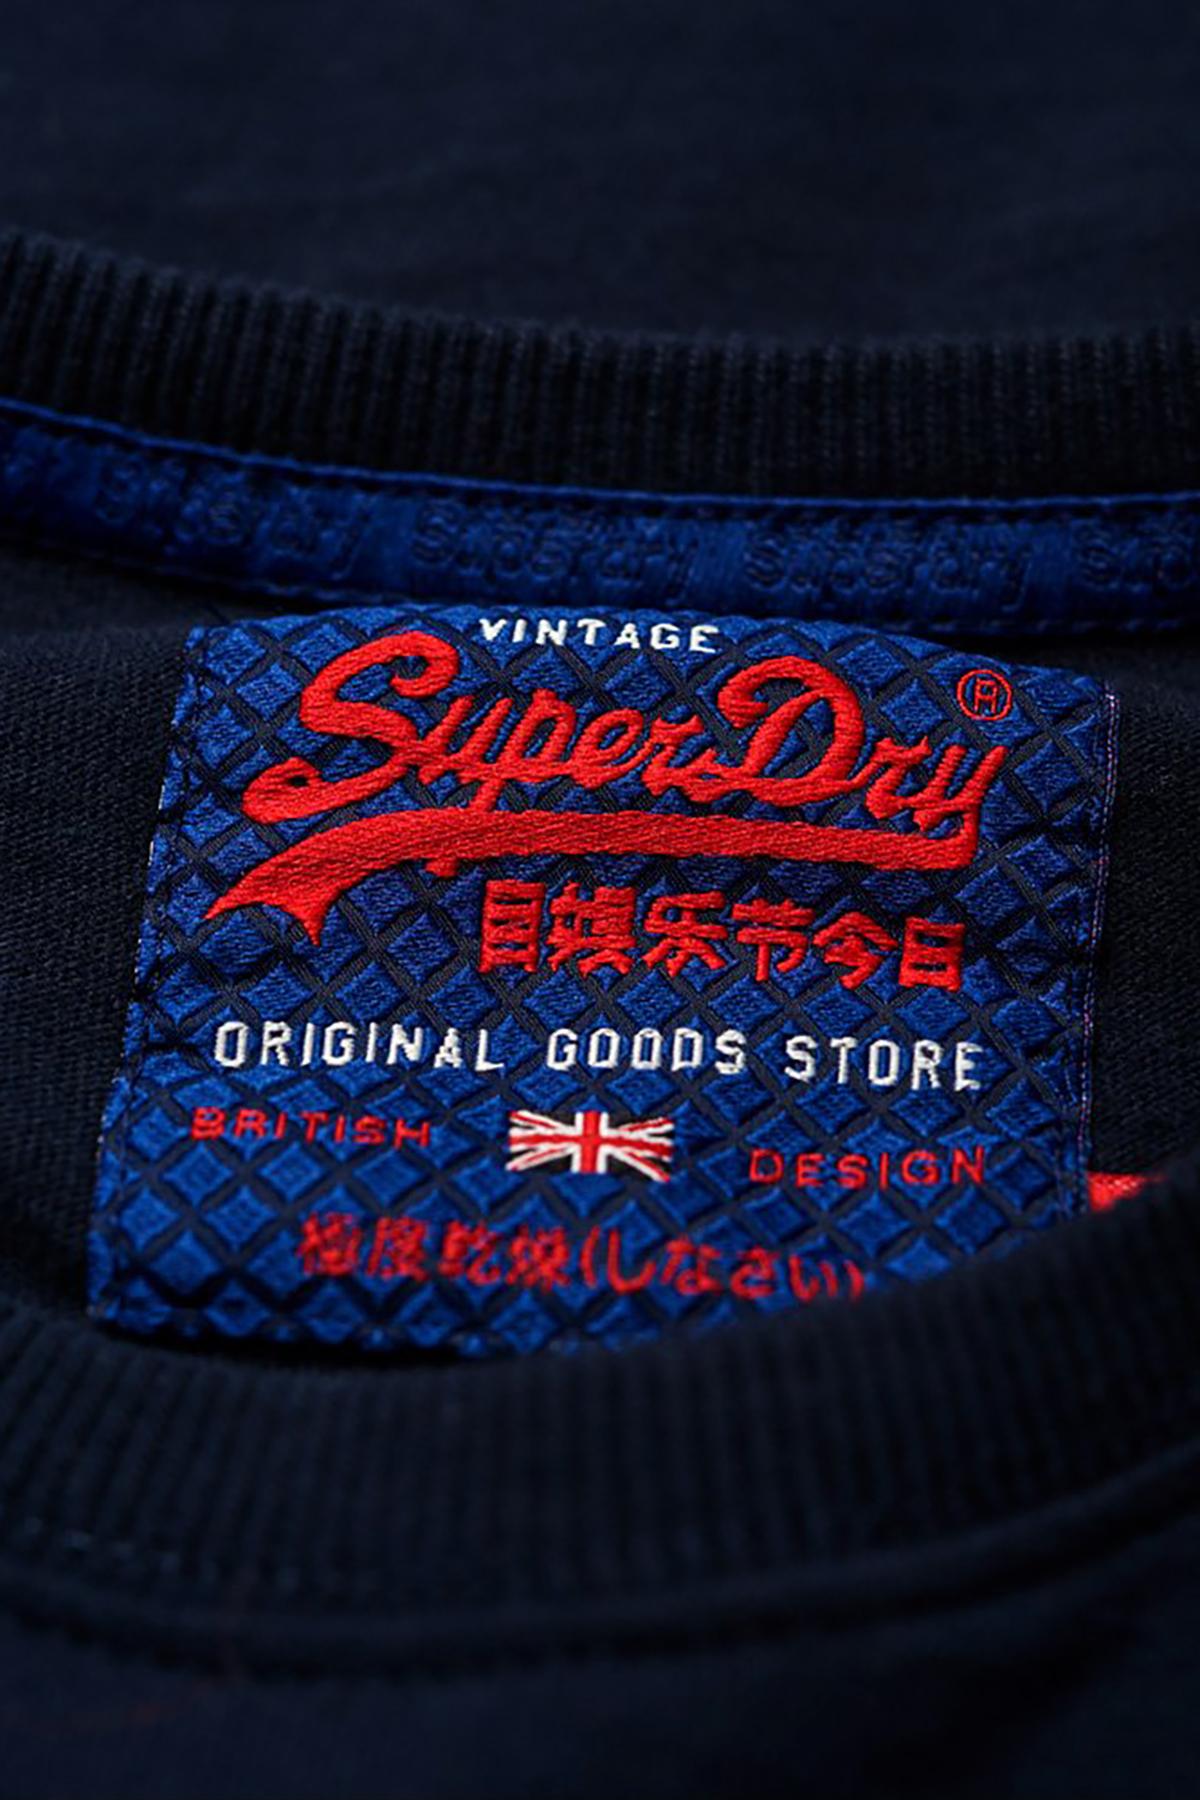 SuperDry Eclipse-Navy Vintage Authentic Long-Sleeve XL CheapUndies T-Shirt –